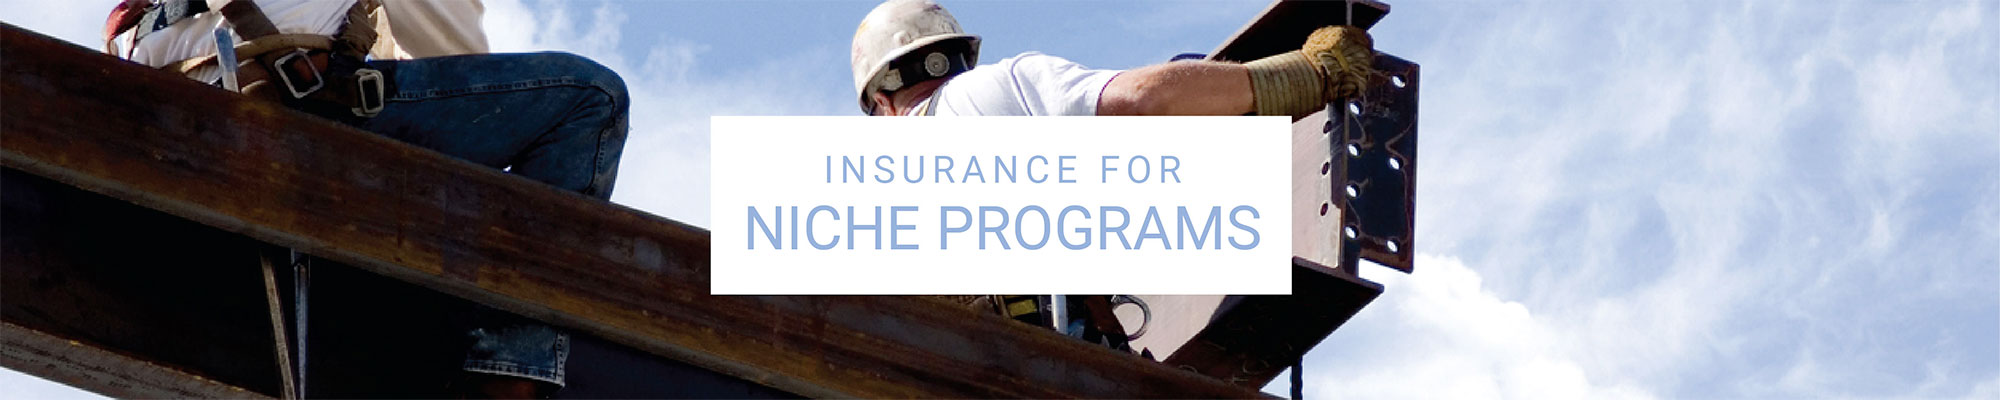 photo of men working construction with text 'Insurance for Niche Programs'